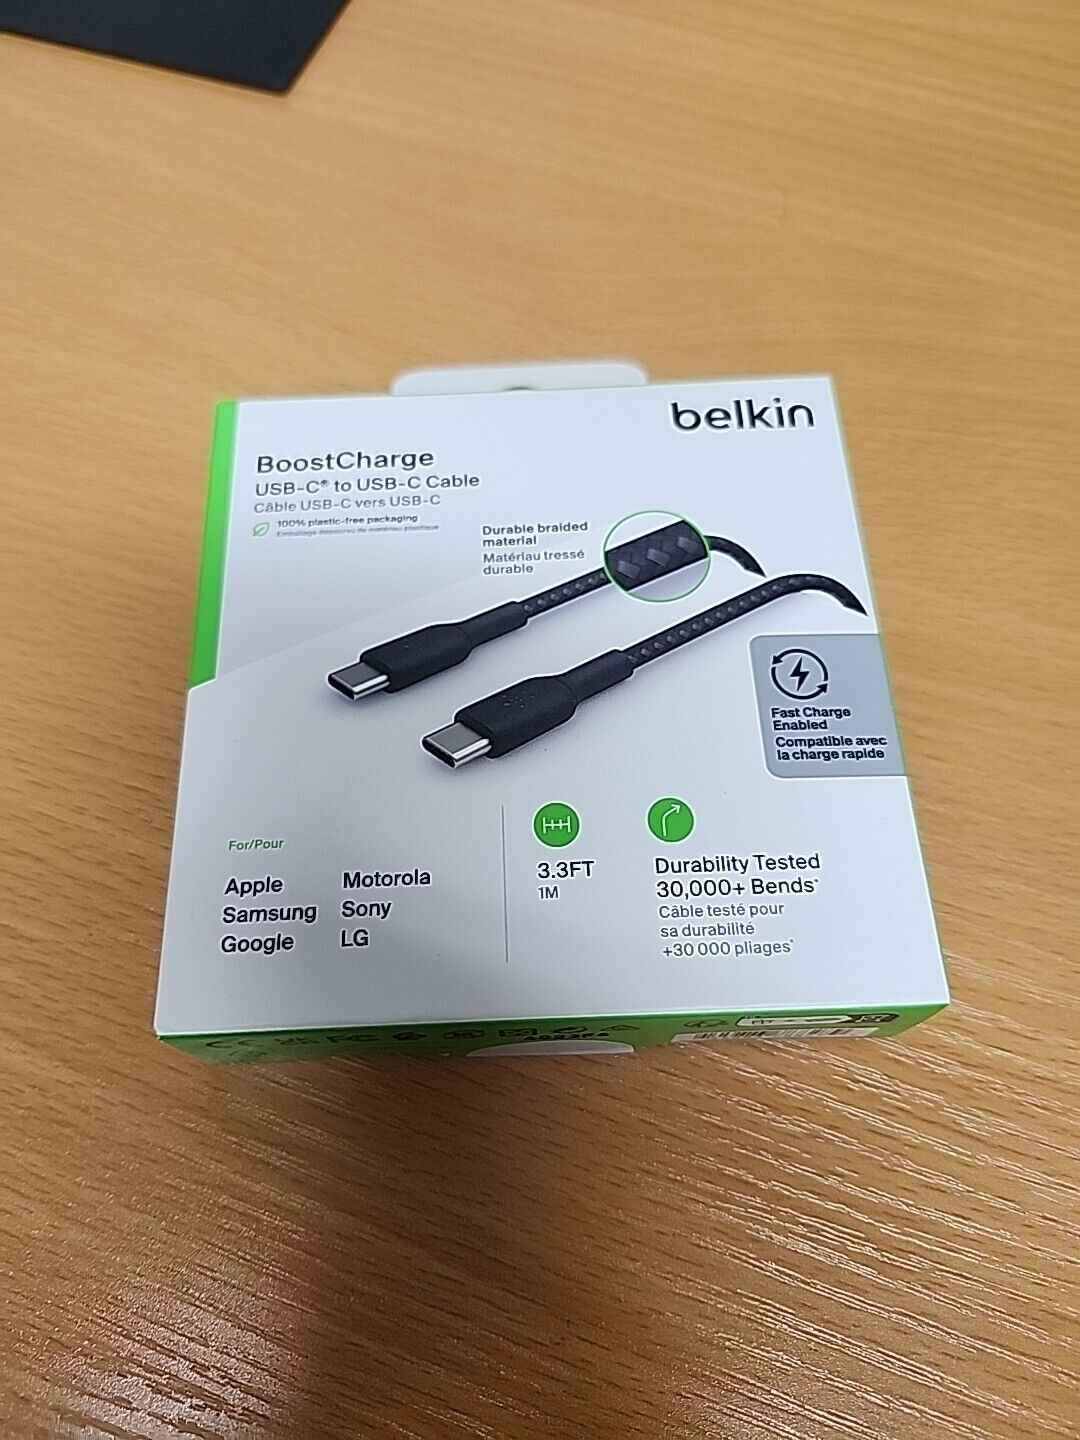 Belkin BOOSTCHARGE - USB-C to USB-C Cable